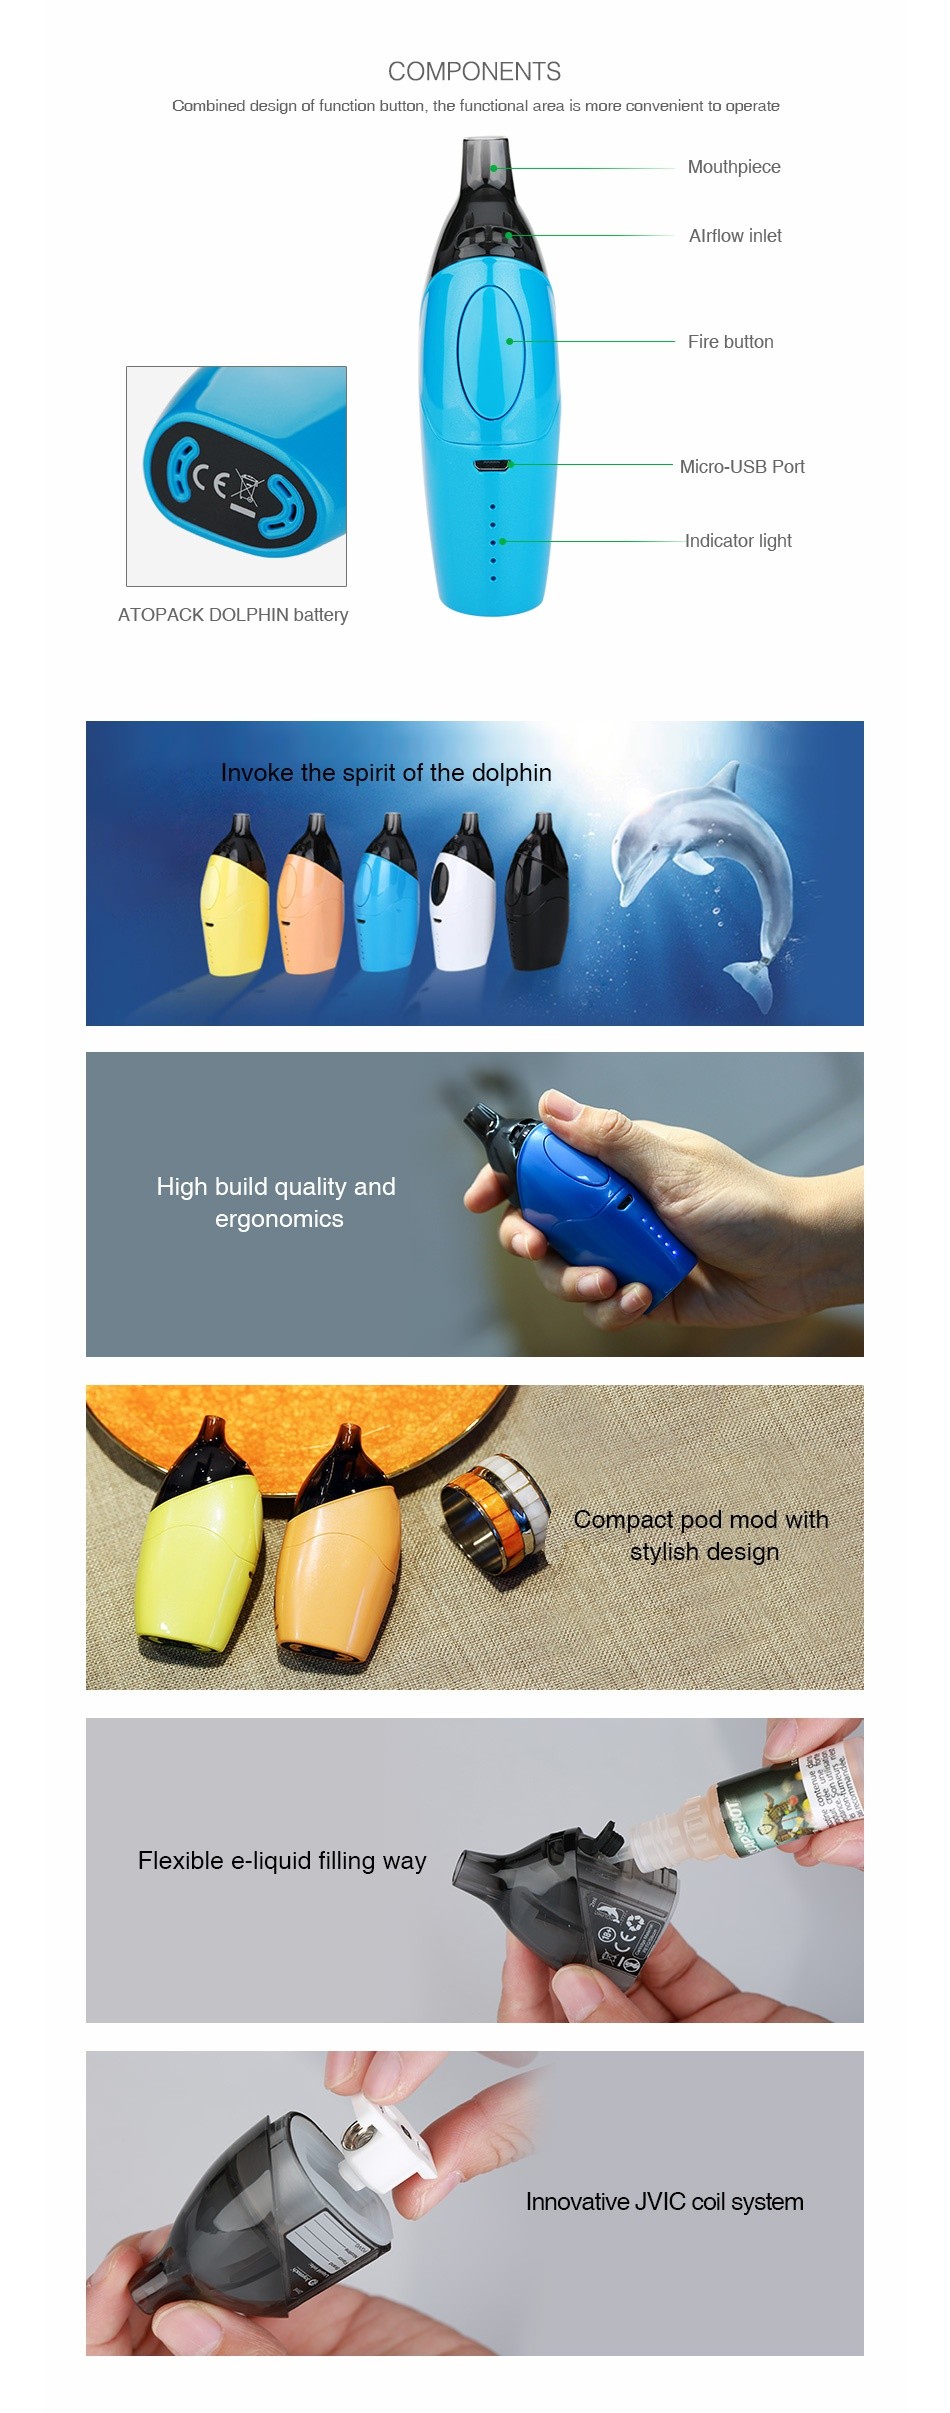 Joyetech Atopack Dolphin Starter Kit 2100mAh COMPONENTS Combined des gn of function button  the functional area is more conven ent to operate AIrflow inlet Fire button Micro USB Port Indicator light AlOl ACK DOLI I lIN battery Invoke the spirit of the dolphin High build quality and ergonomIcs Compact pod mod with tylish design Flexible e liquid filling way Innovative MVIC coil system